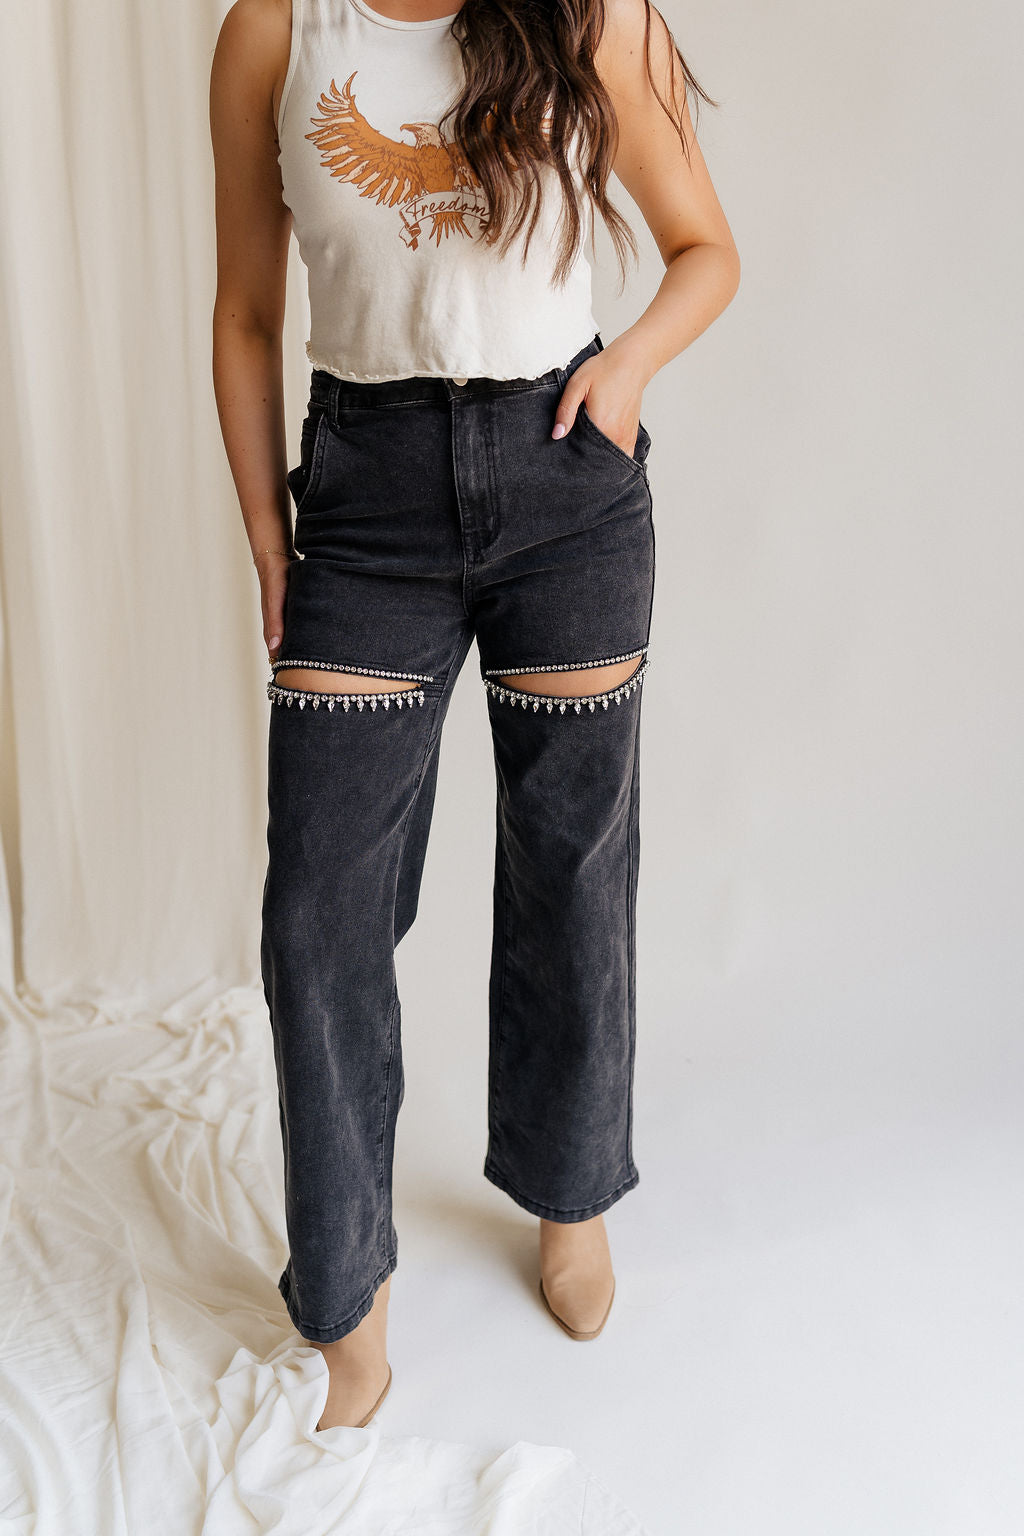 Lower body front view of female model wearing the Remi Rhinestone Slit Black Jeans that have black denim, thigh slits with rhinestone trim, and pockets.